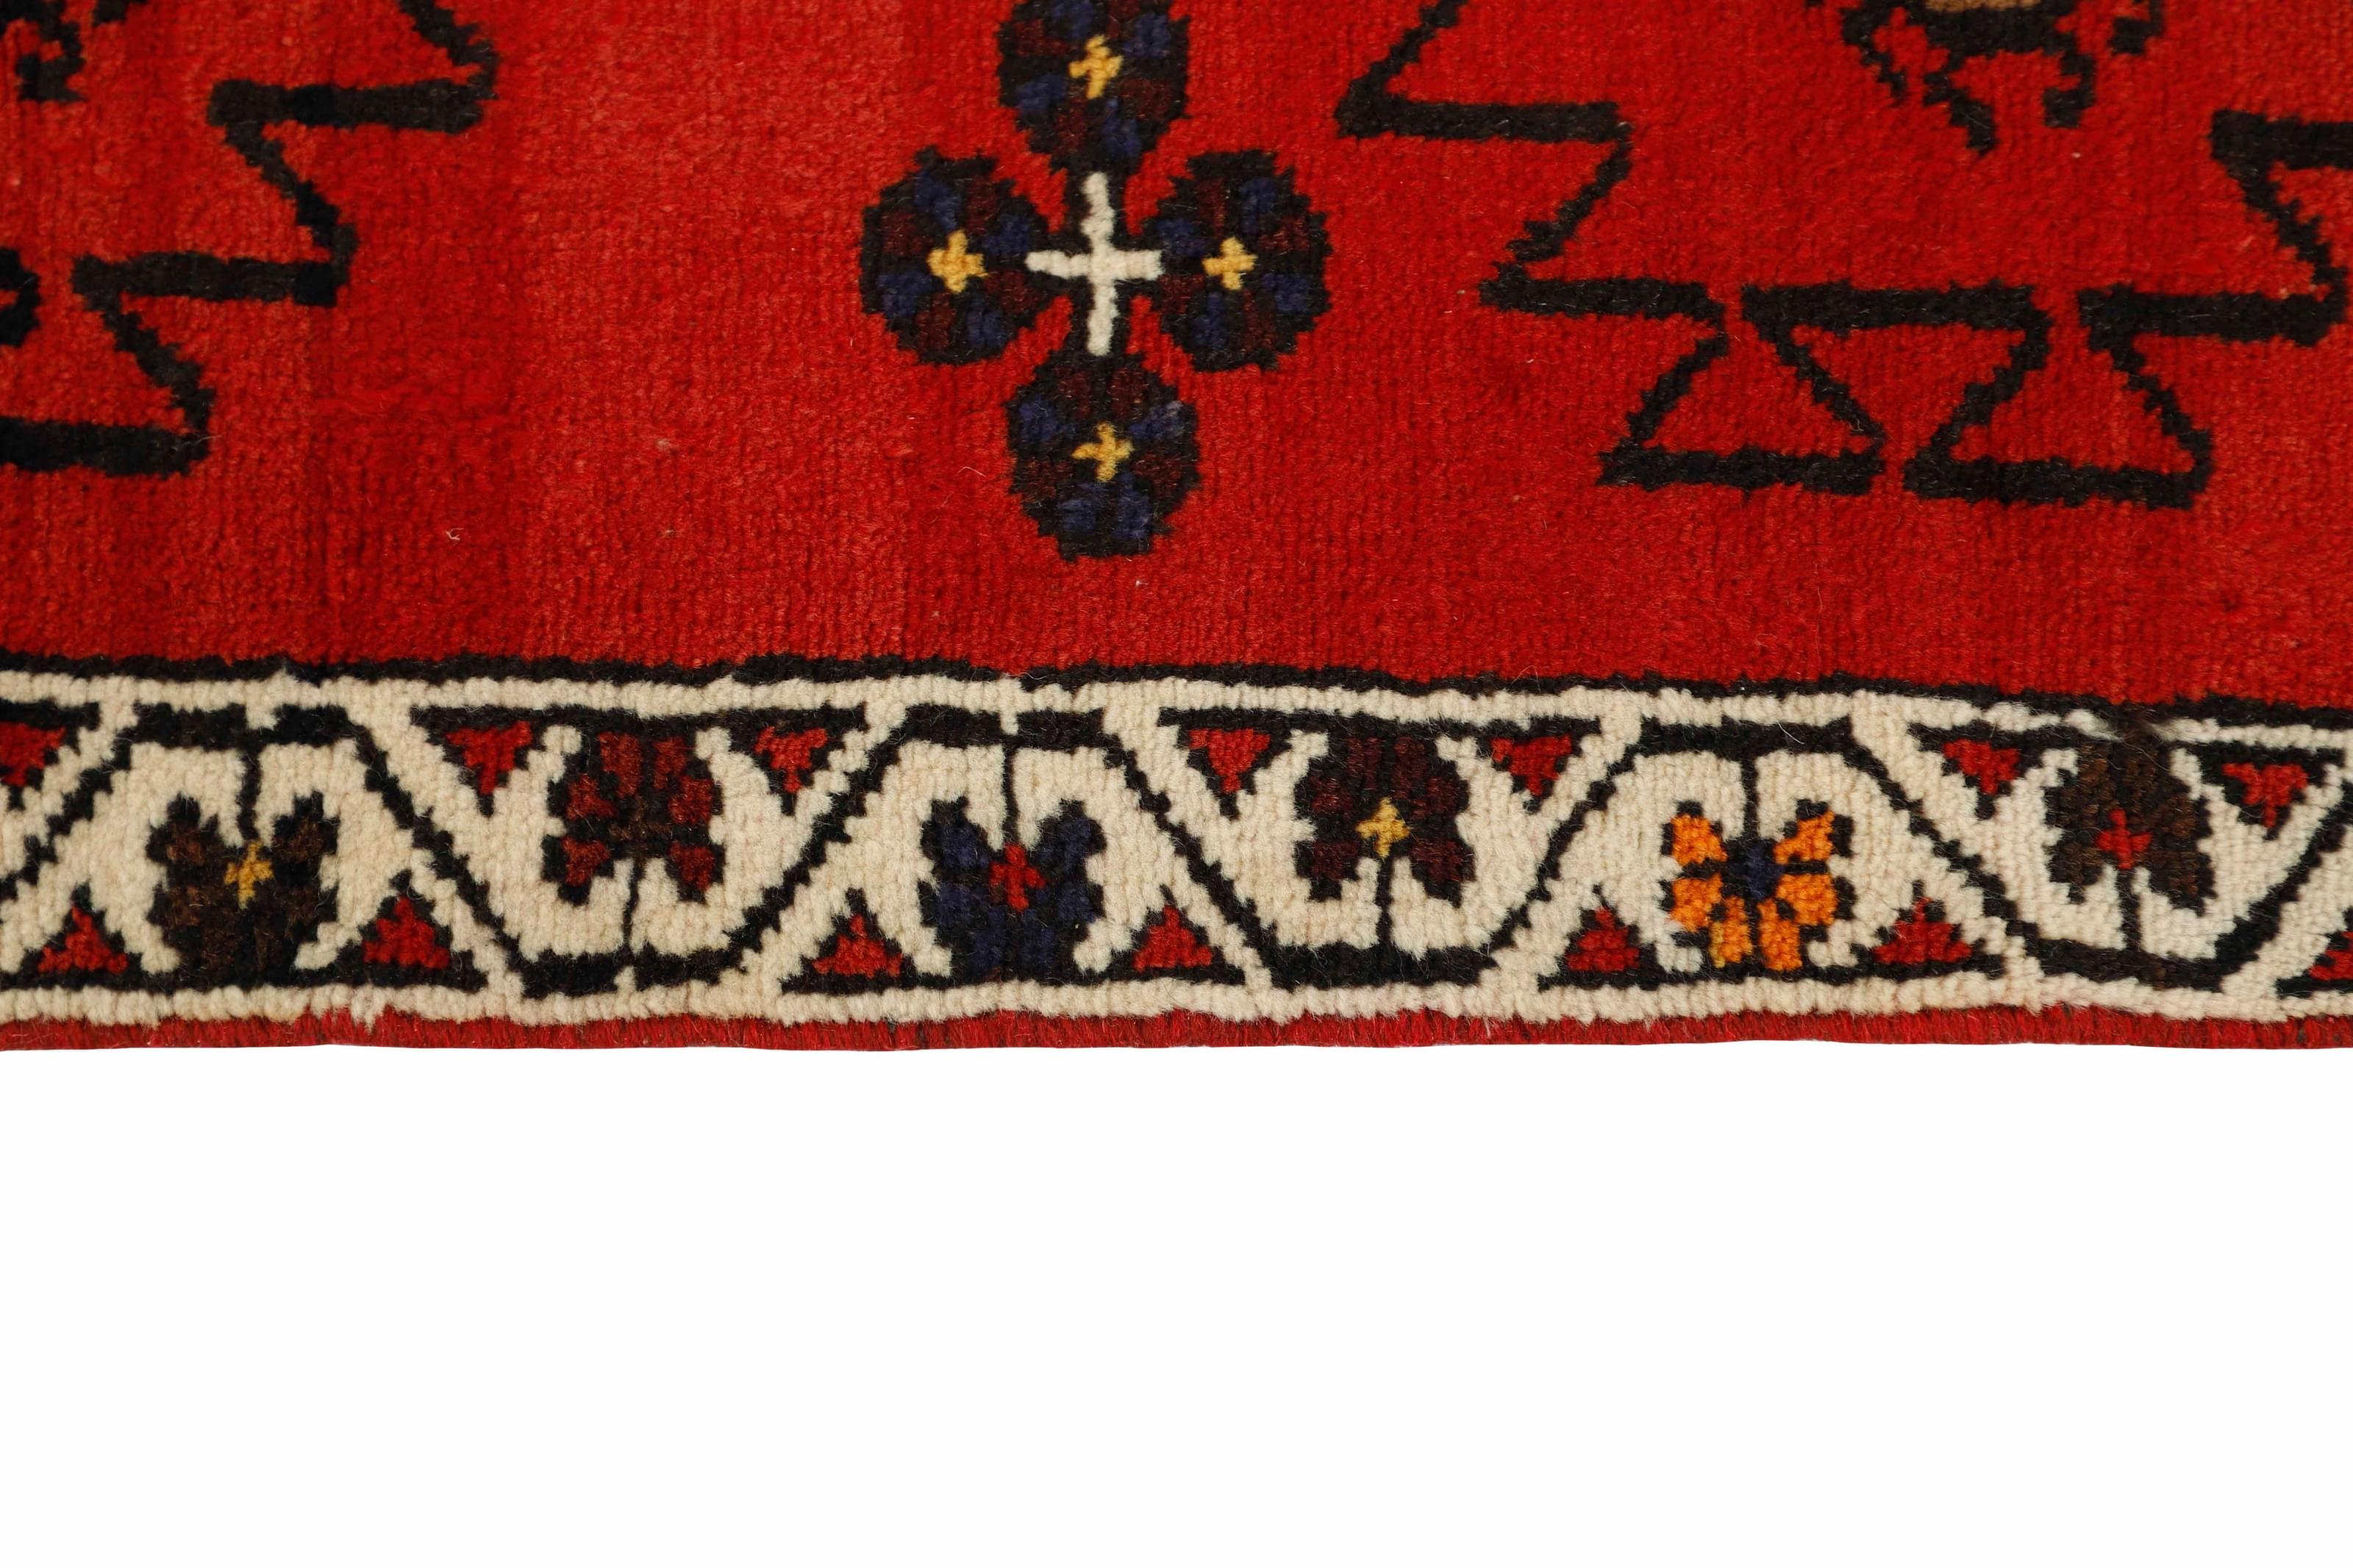 Red and black traditional persian runner with floral design